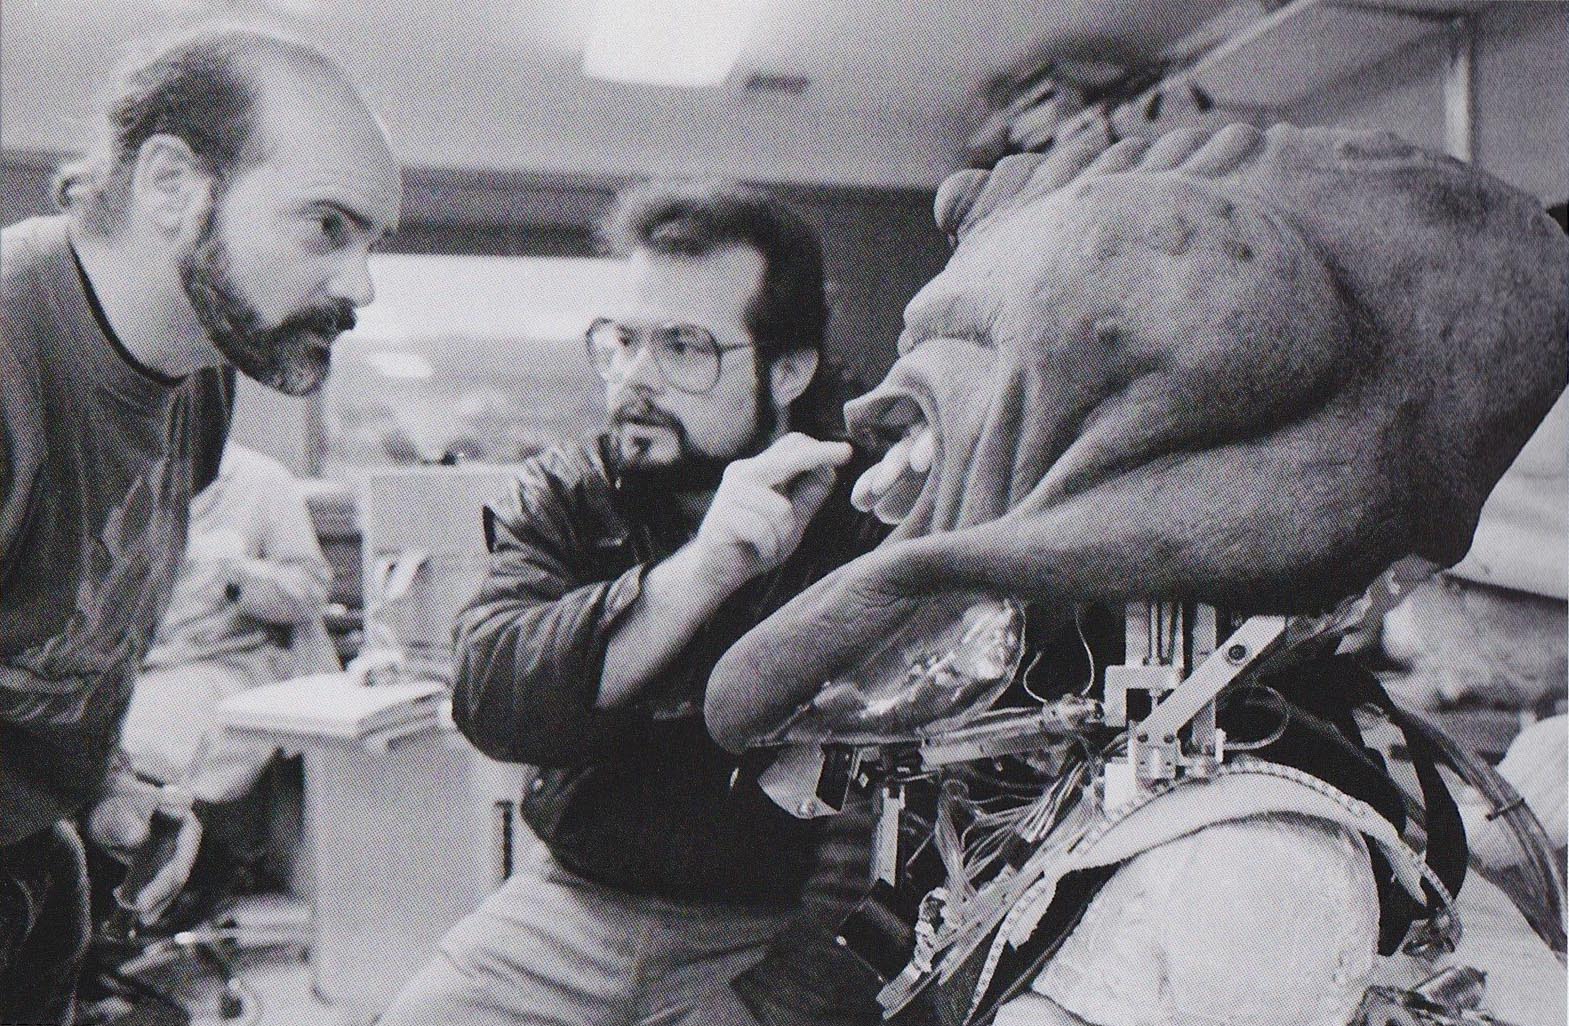 Ghostbusters 2 (1989) ILM Creature Shop. Mark Siegel, Tim Lawrence and Slimer (set up on Robin Selby's life-cast). We're talking about where to re-glue the lip attachments before inner-lip appliances go in.